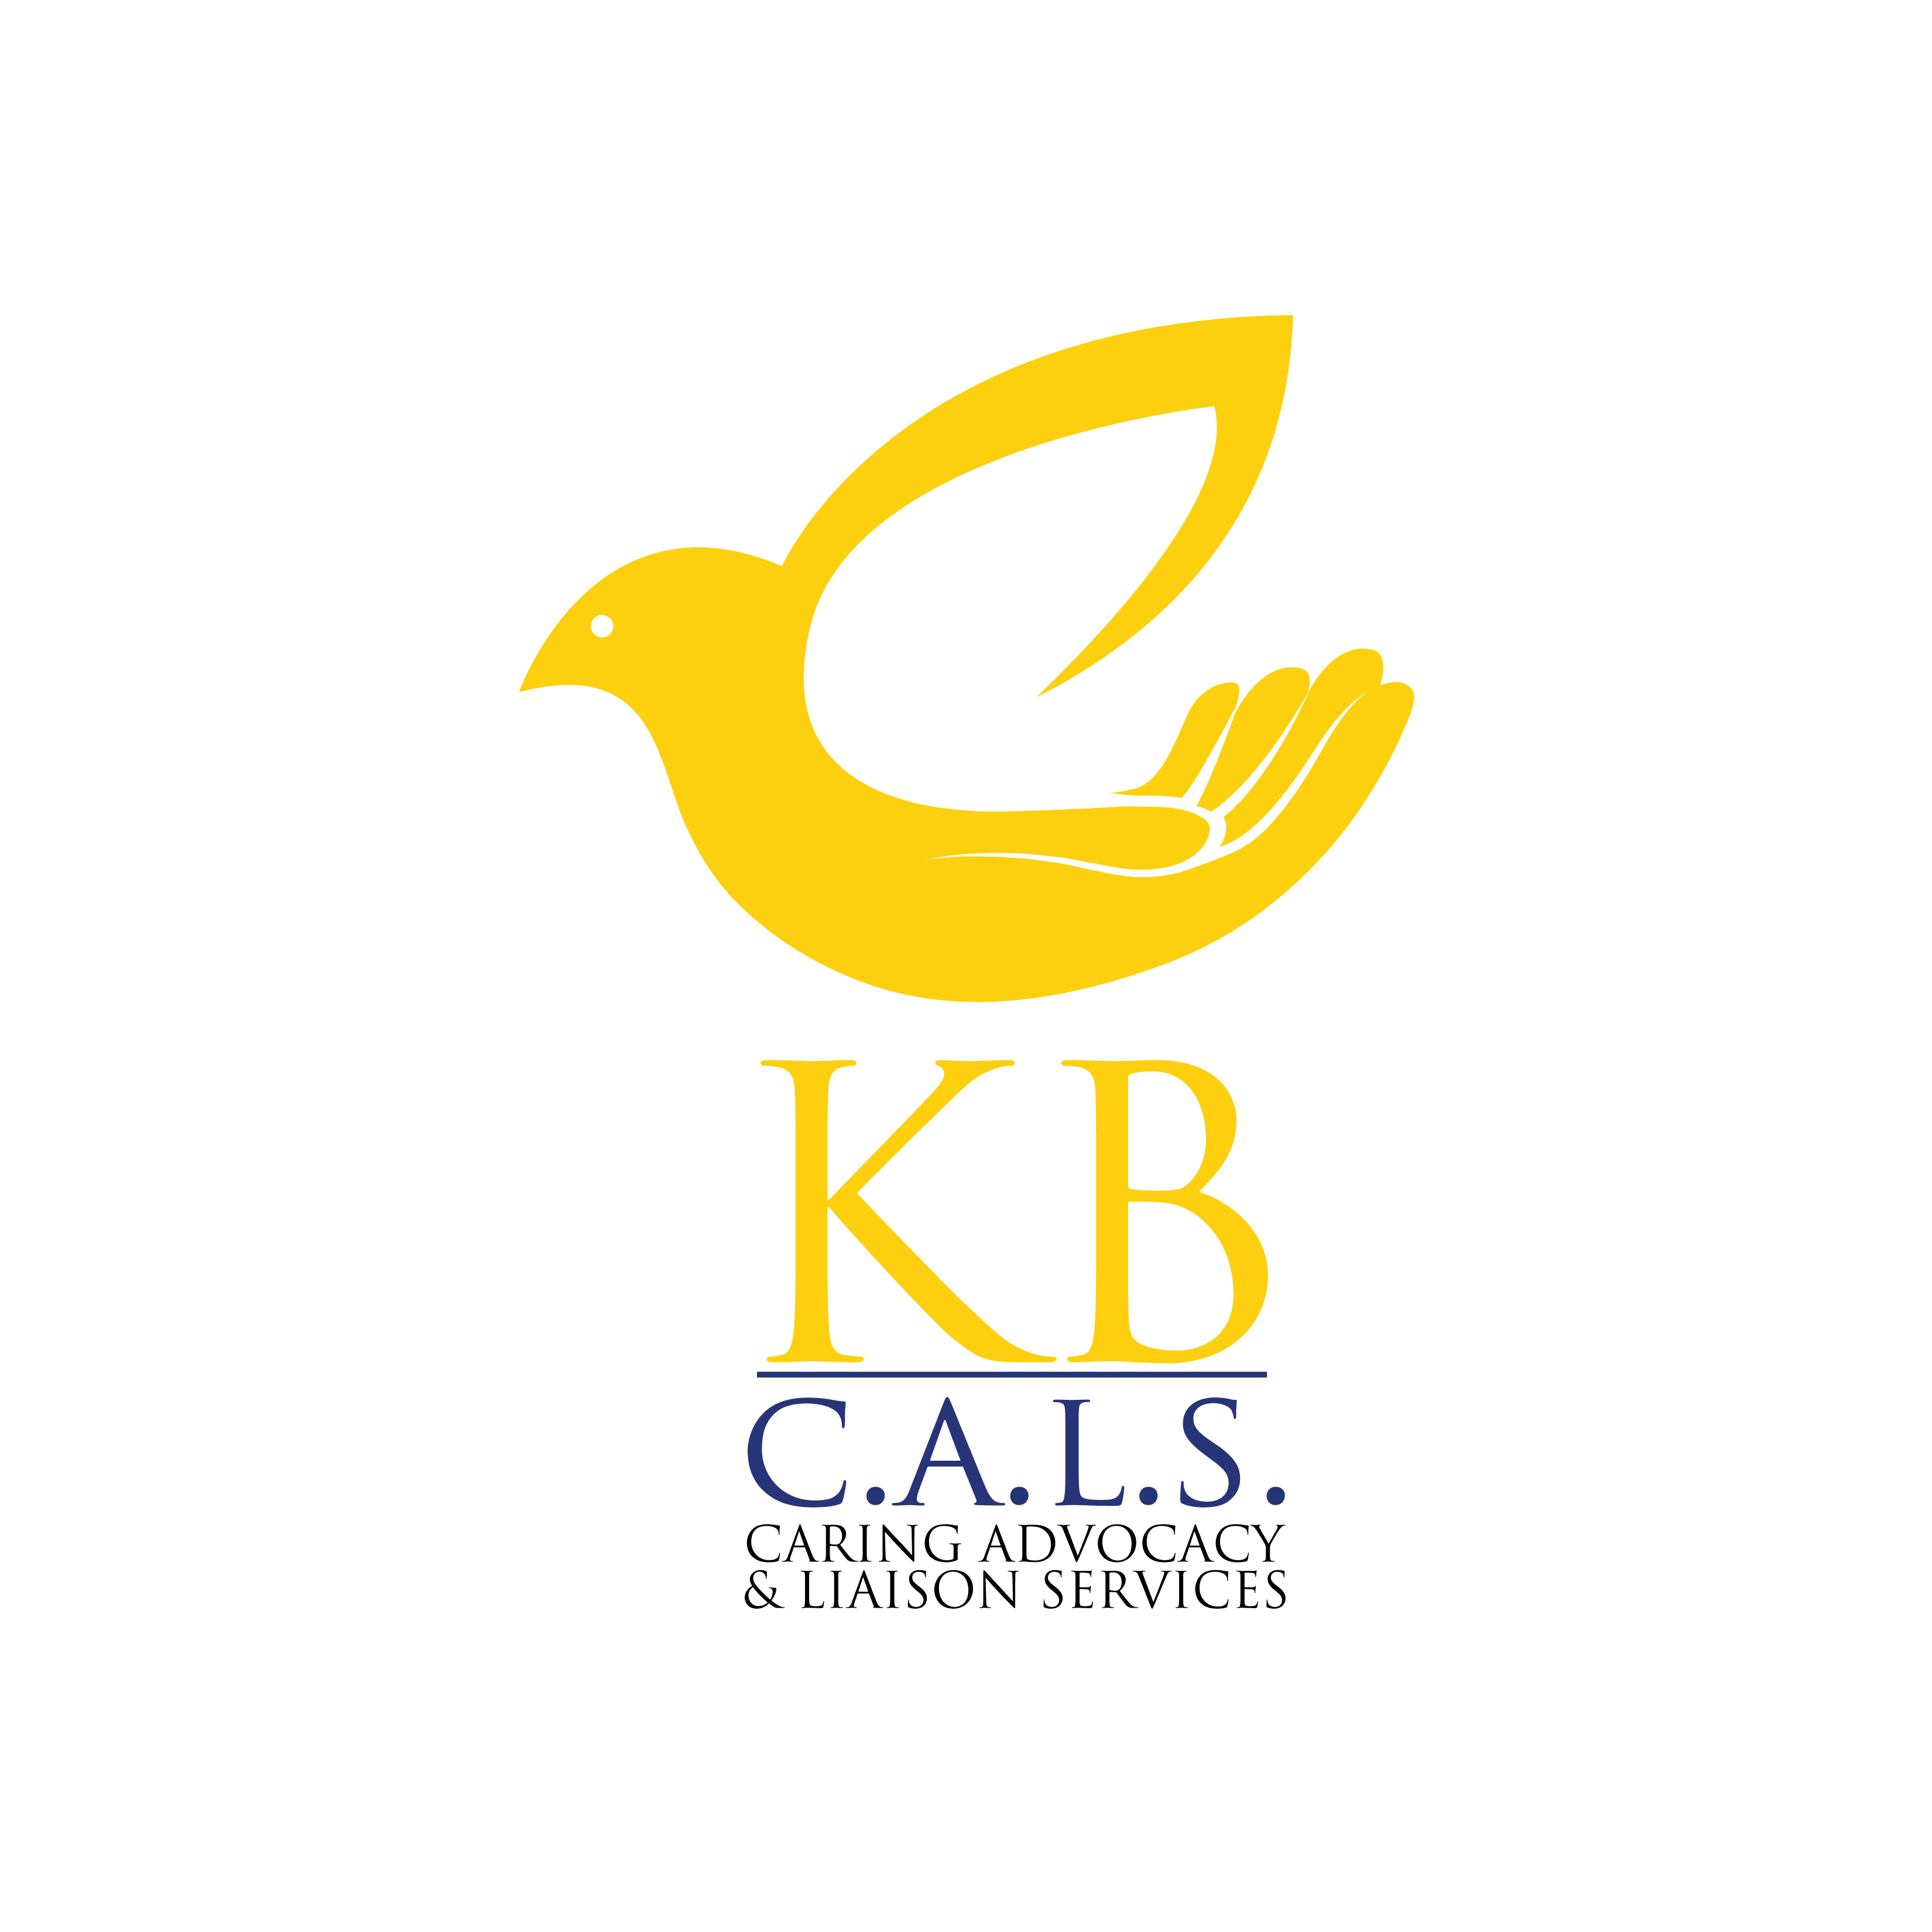 KB CALS - Caring Advocacy & Liaison Services Logo